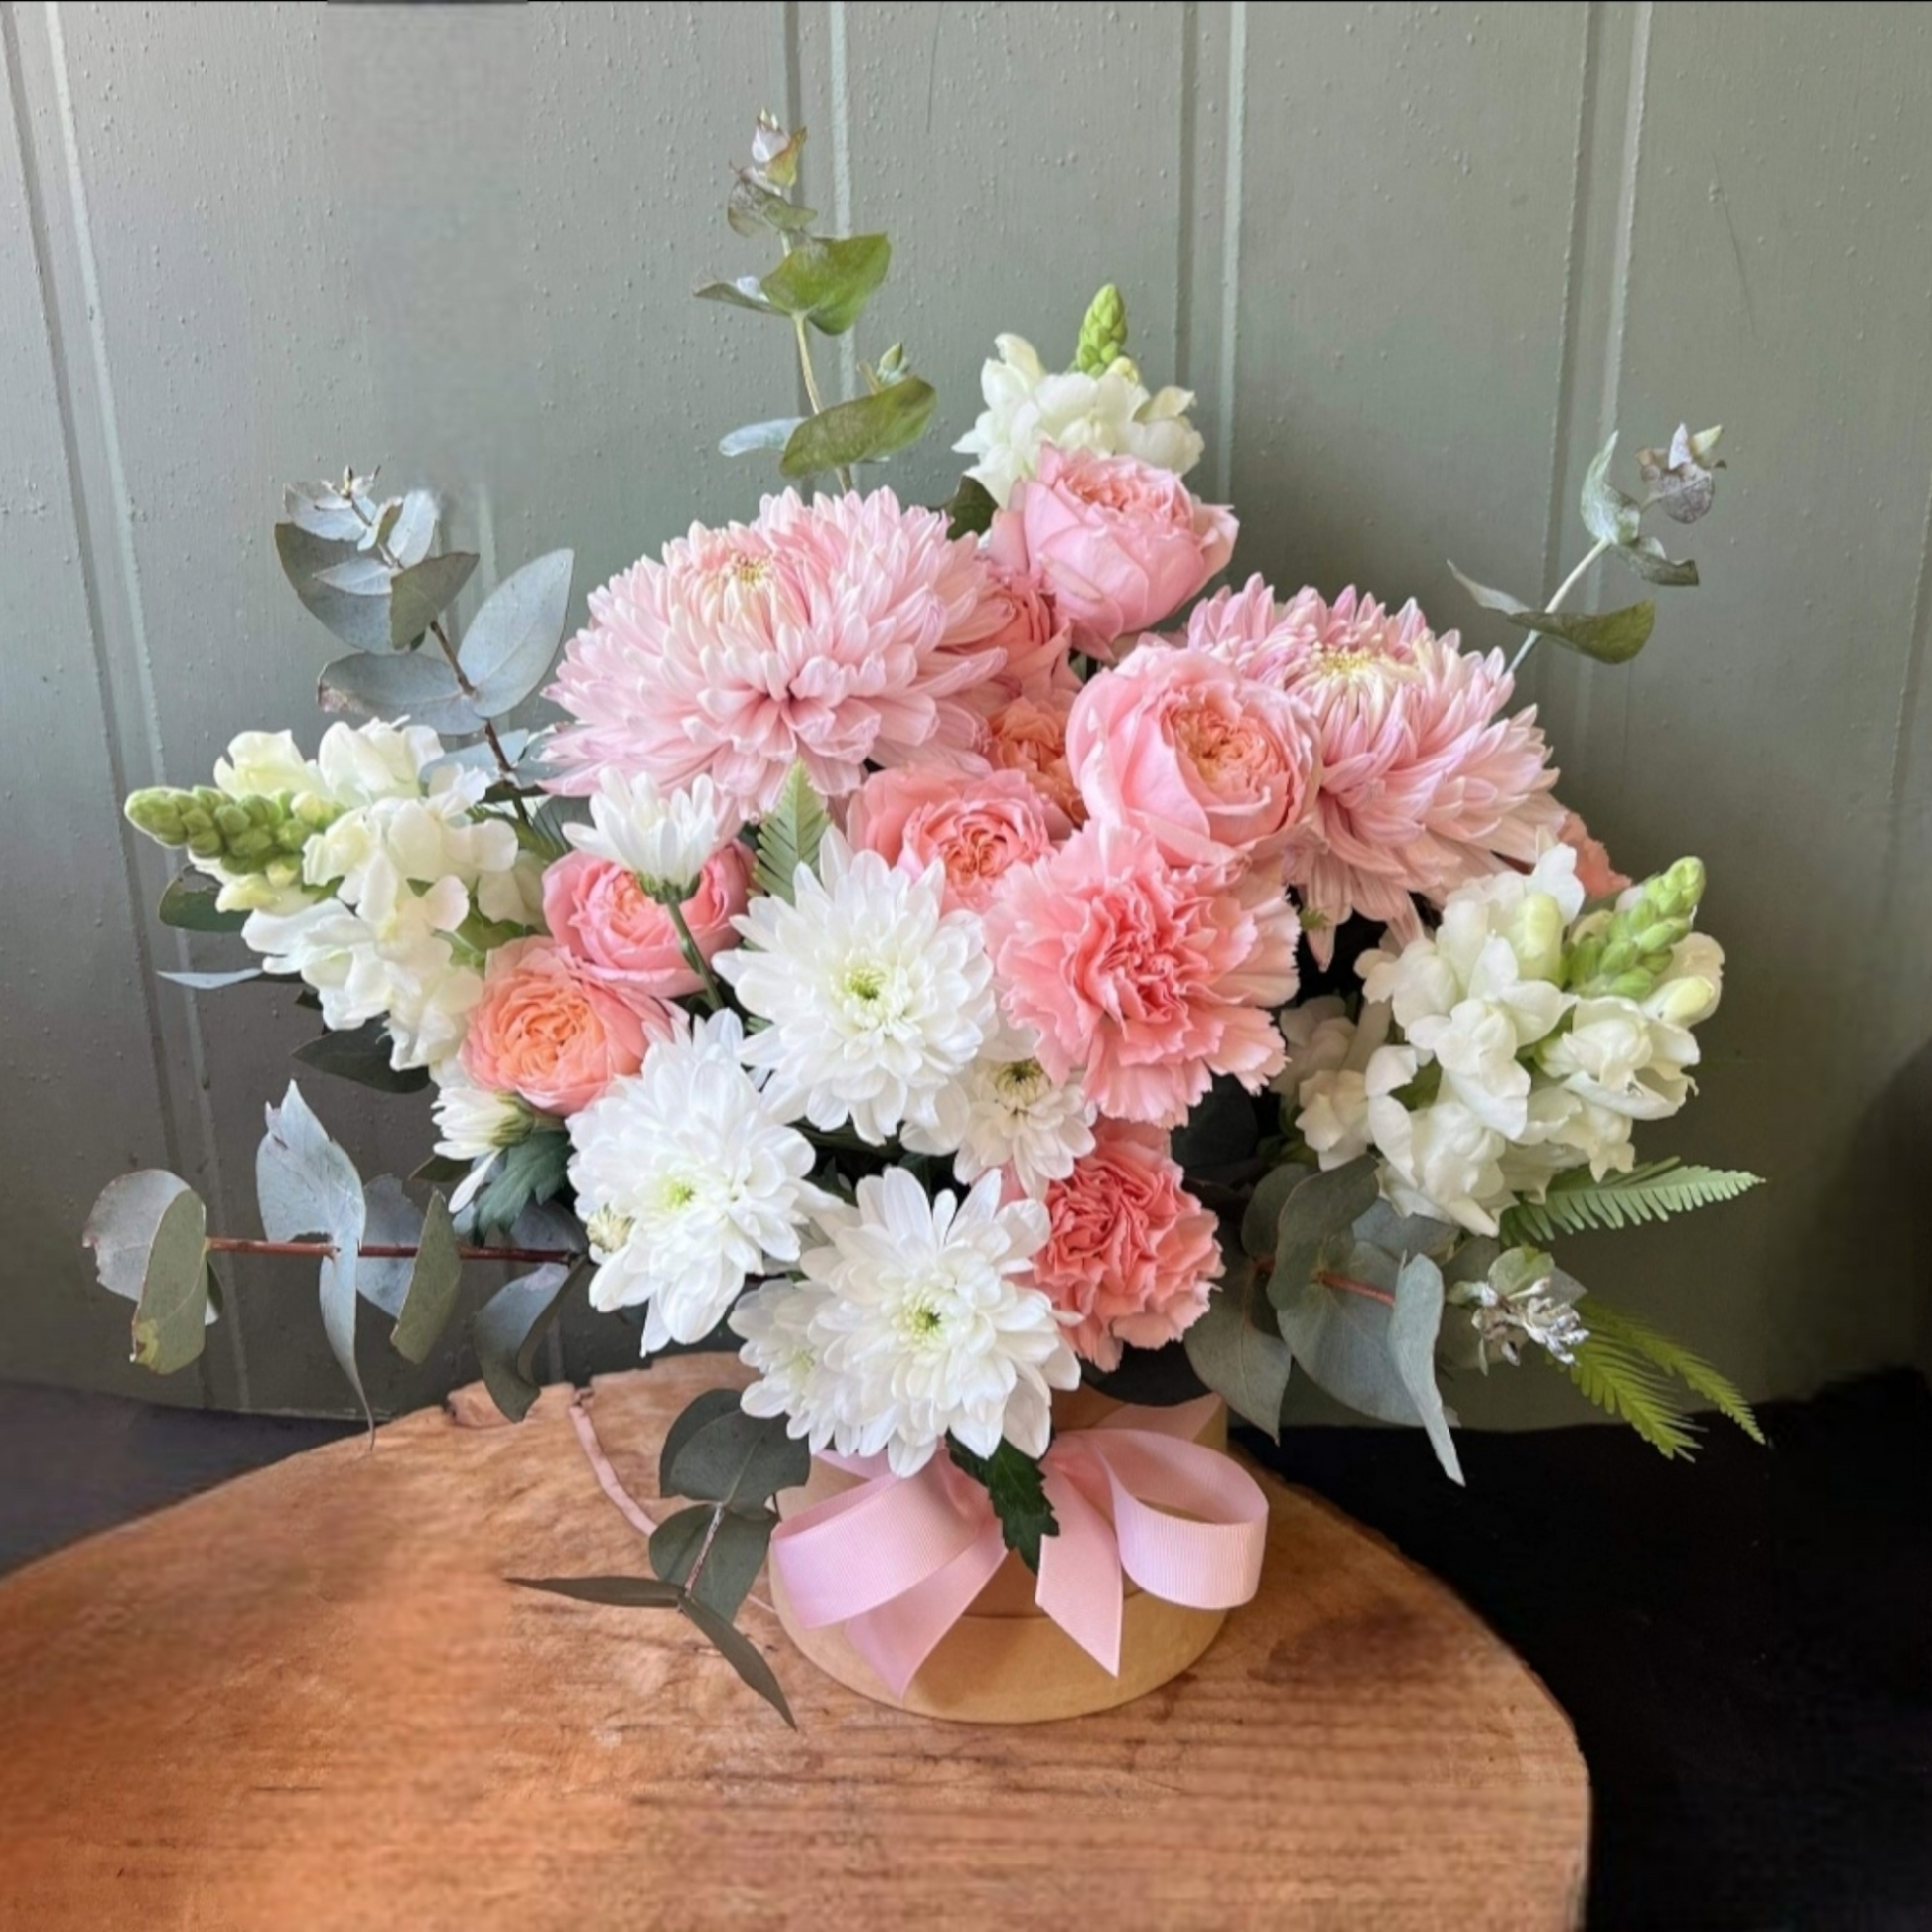 Pink and white tonal flowers arranged in a hatbox